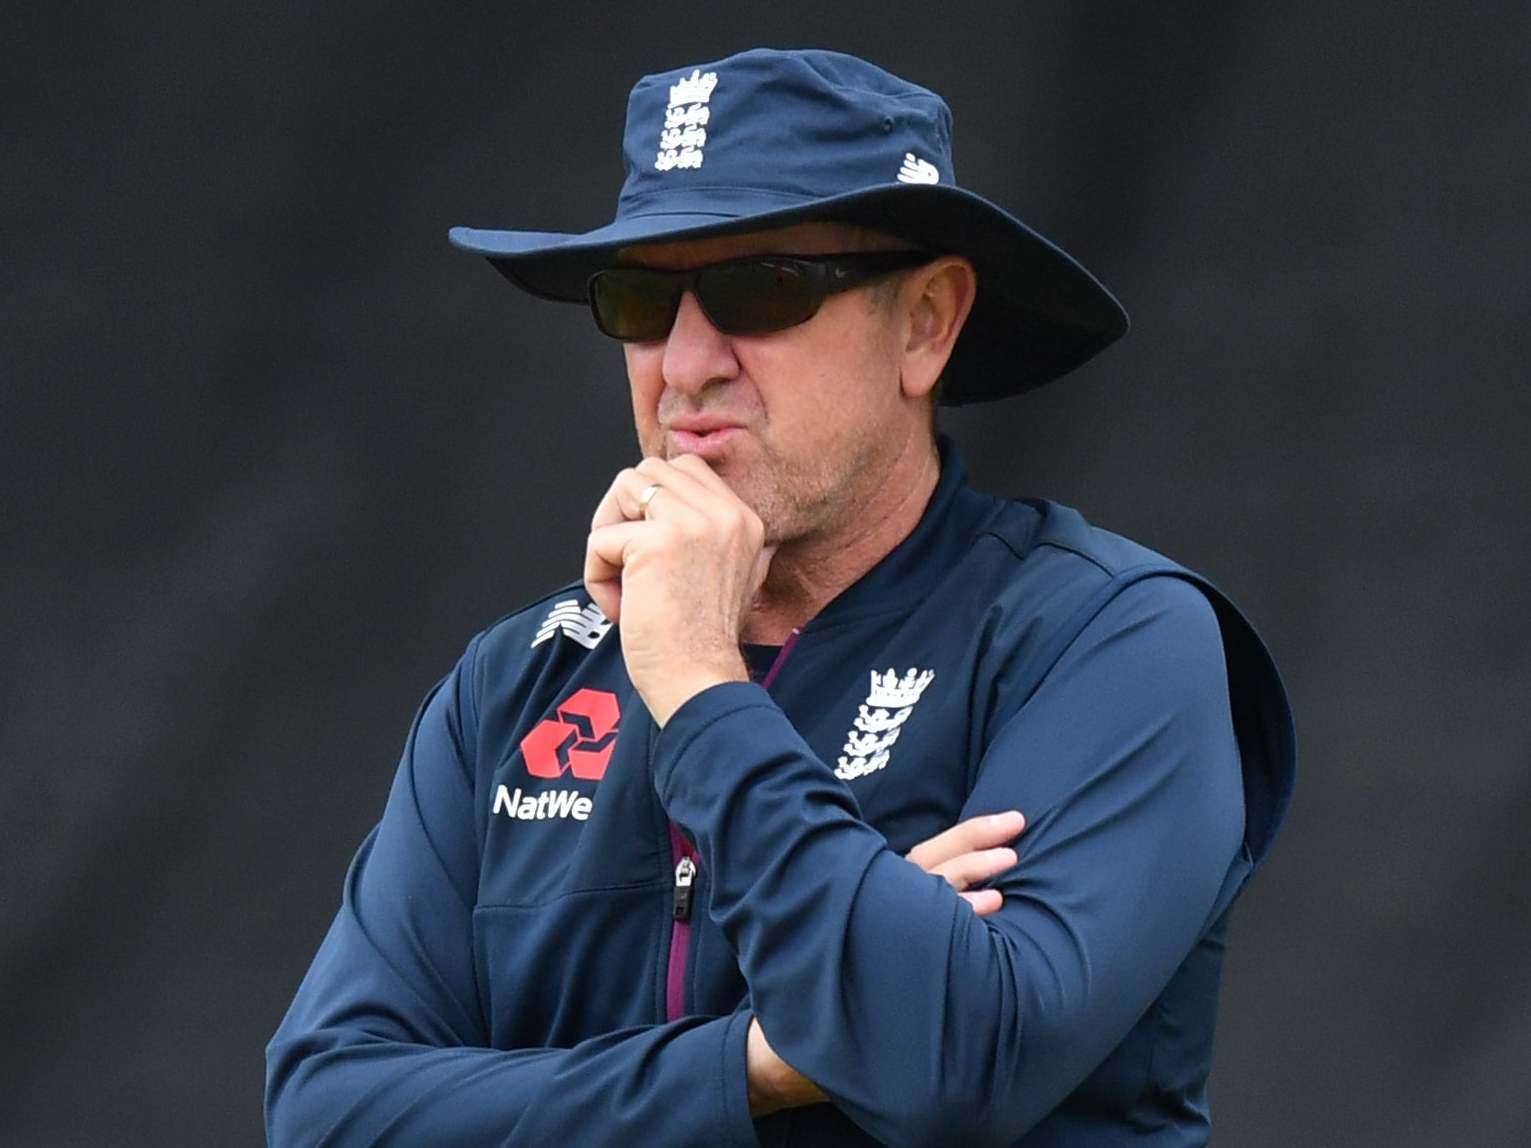 England coach Trevor Bayliss has suggested flatter pitches in county cricket could improve England’s Test batting